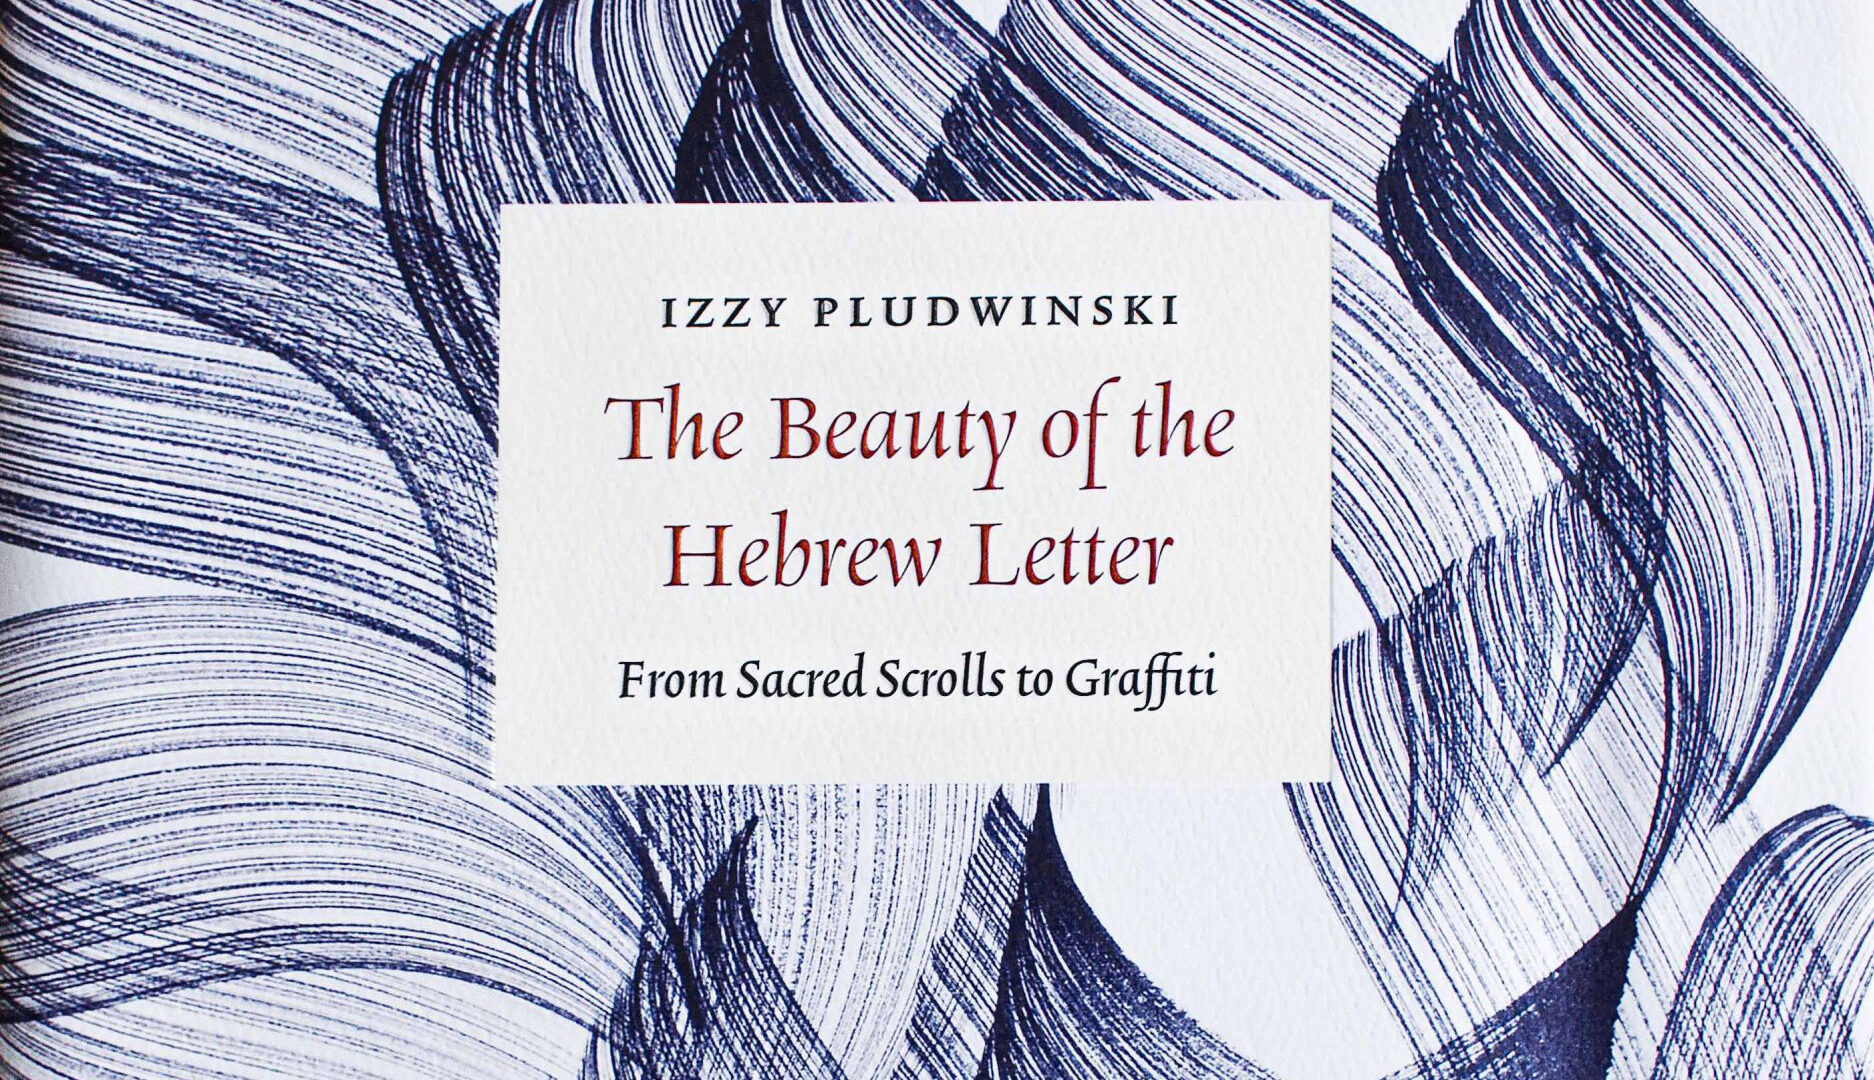 Image for Podcast: Izzy Pludwinski on the Art and Beauty of Hebrew Calligraphy